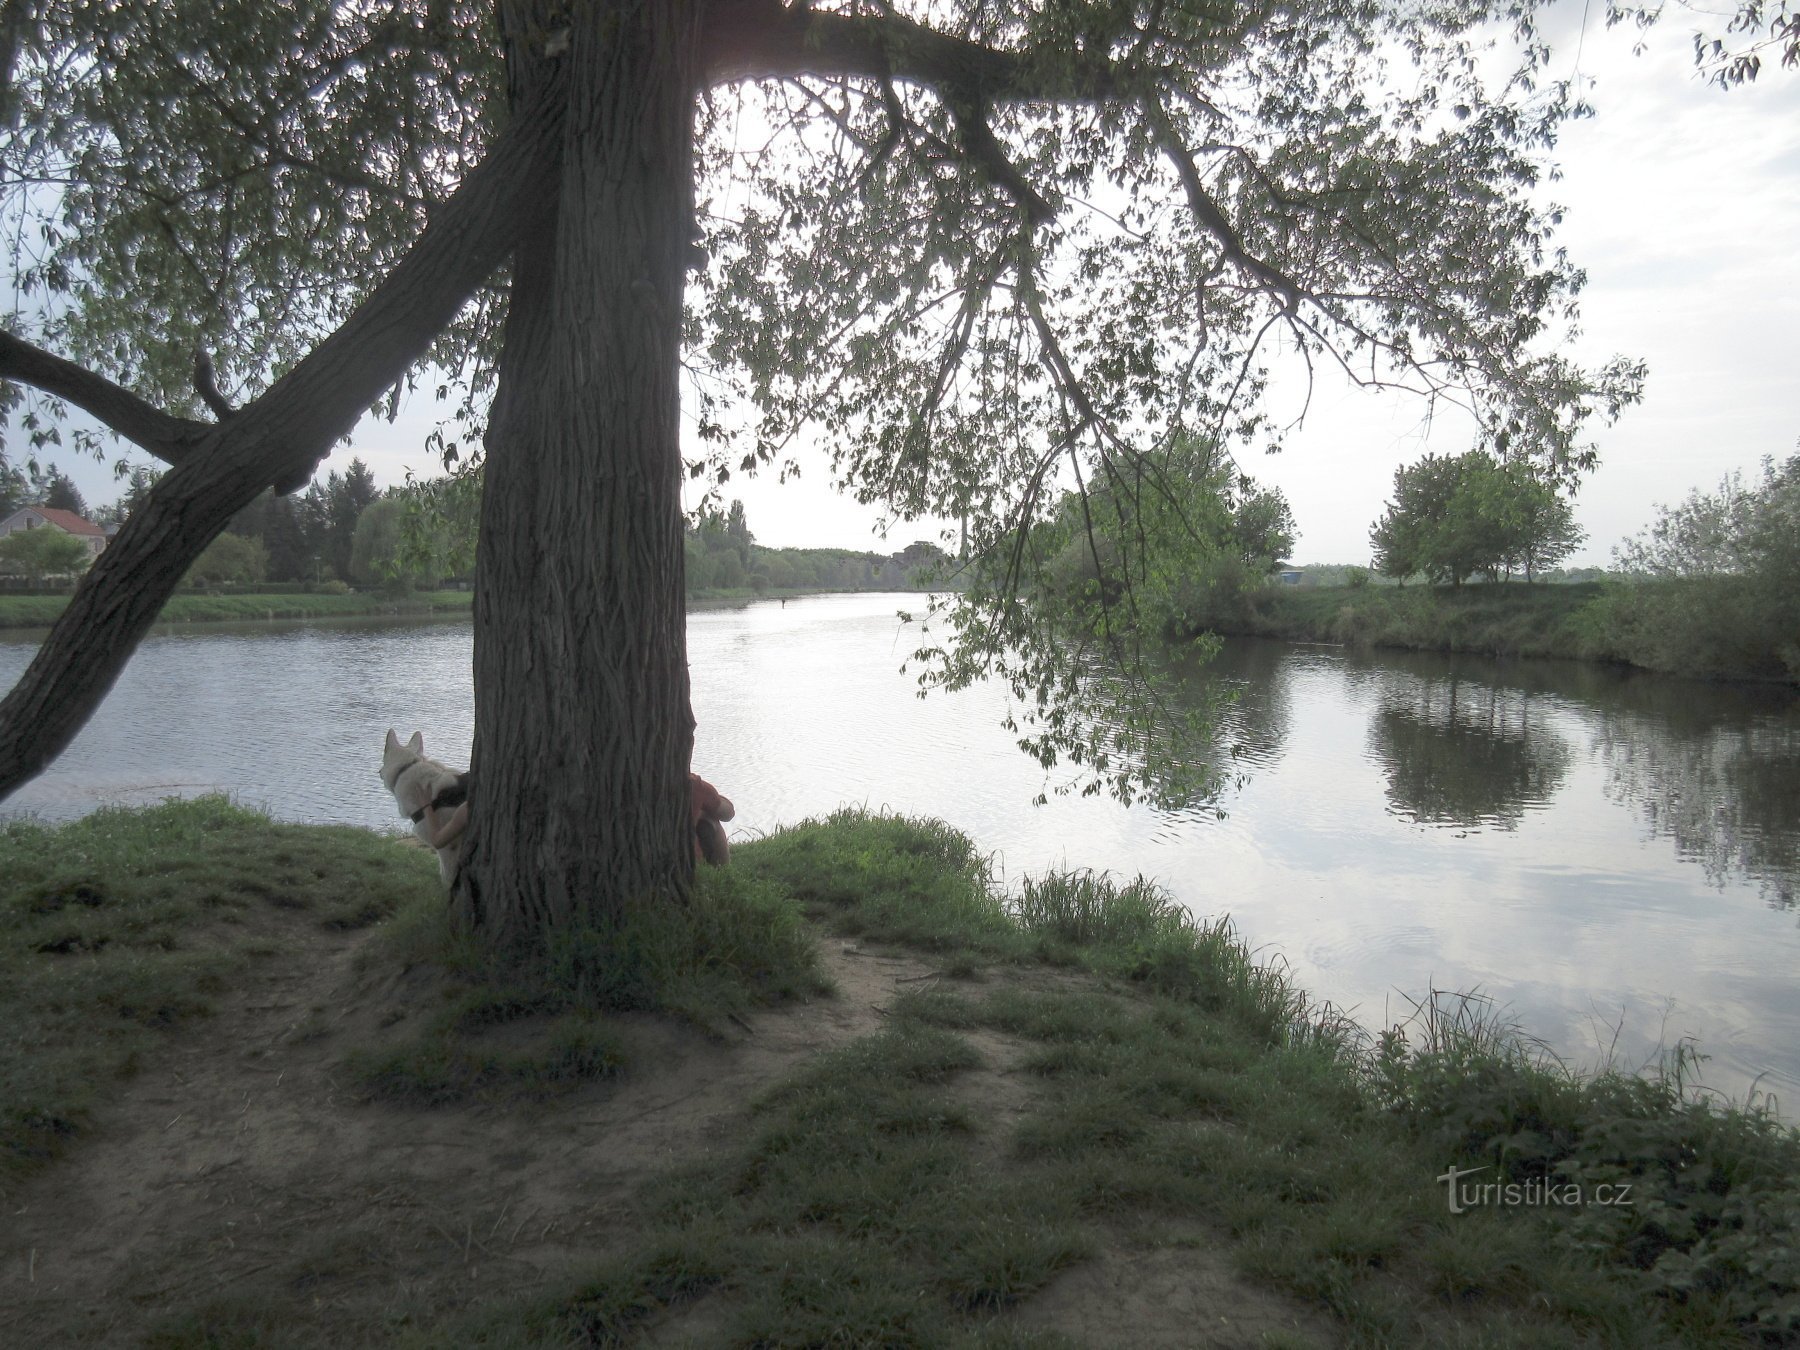 The confluence of the Elbe and the Jizera